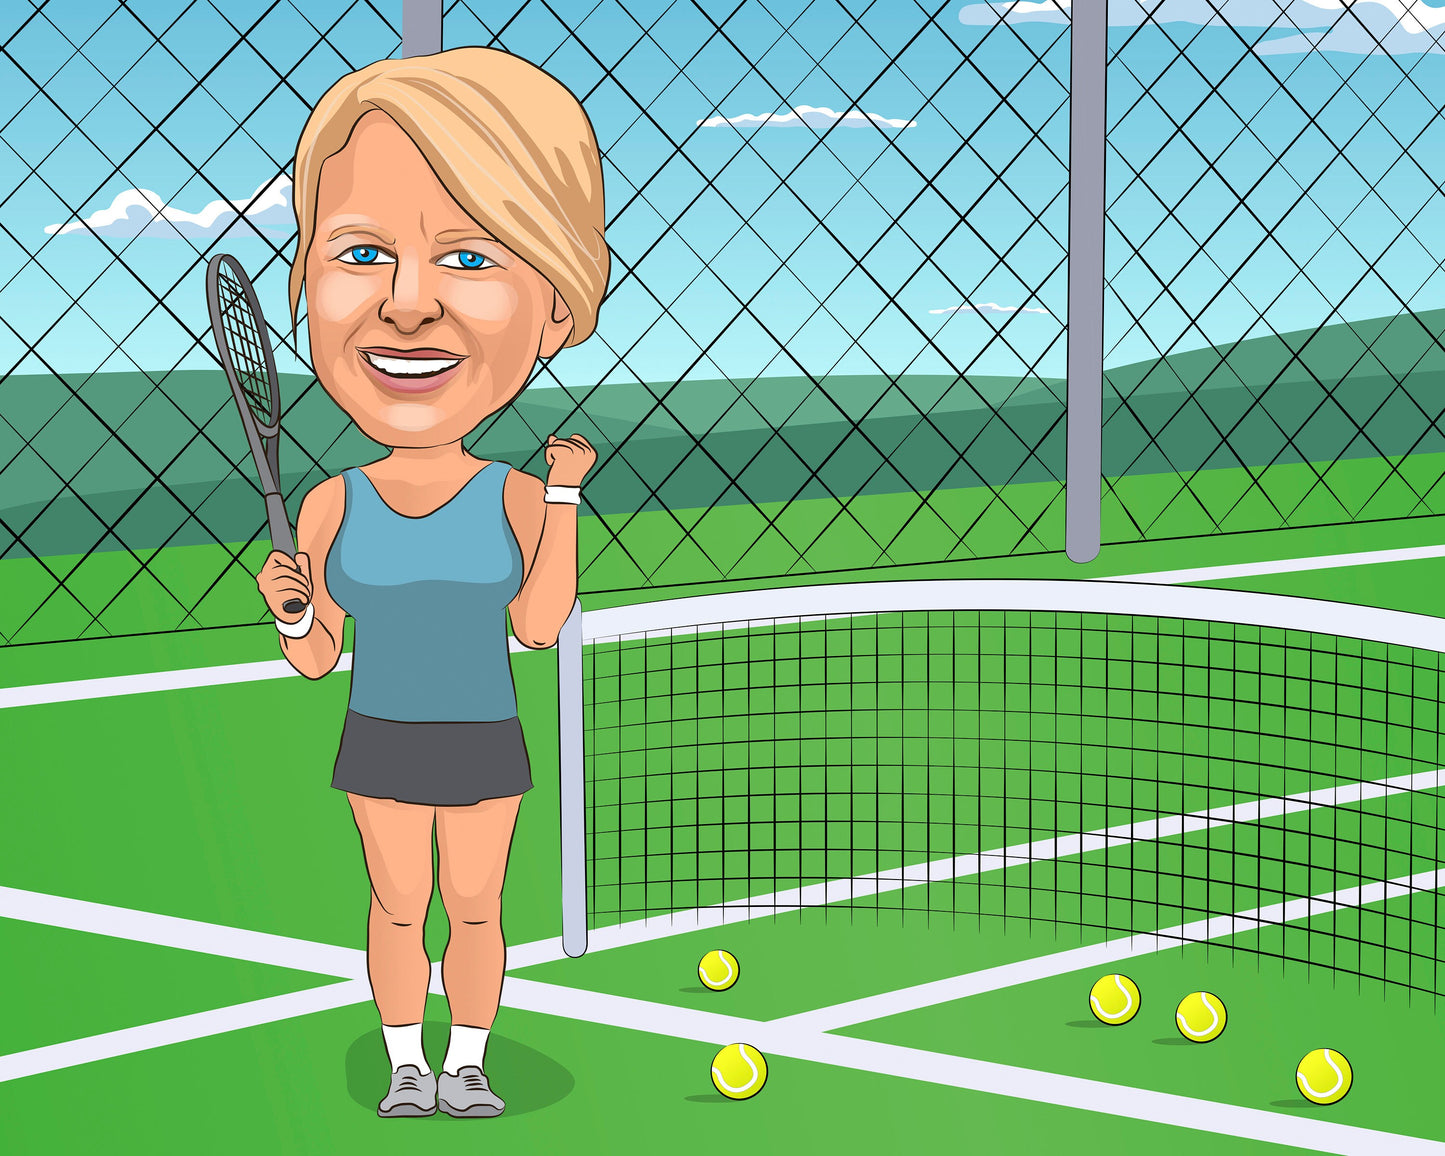 Tennis Player Gift - Custom Caricature Portrait From Your Photo/tennis coach gift